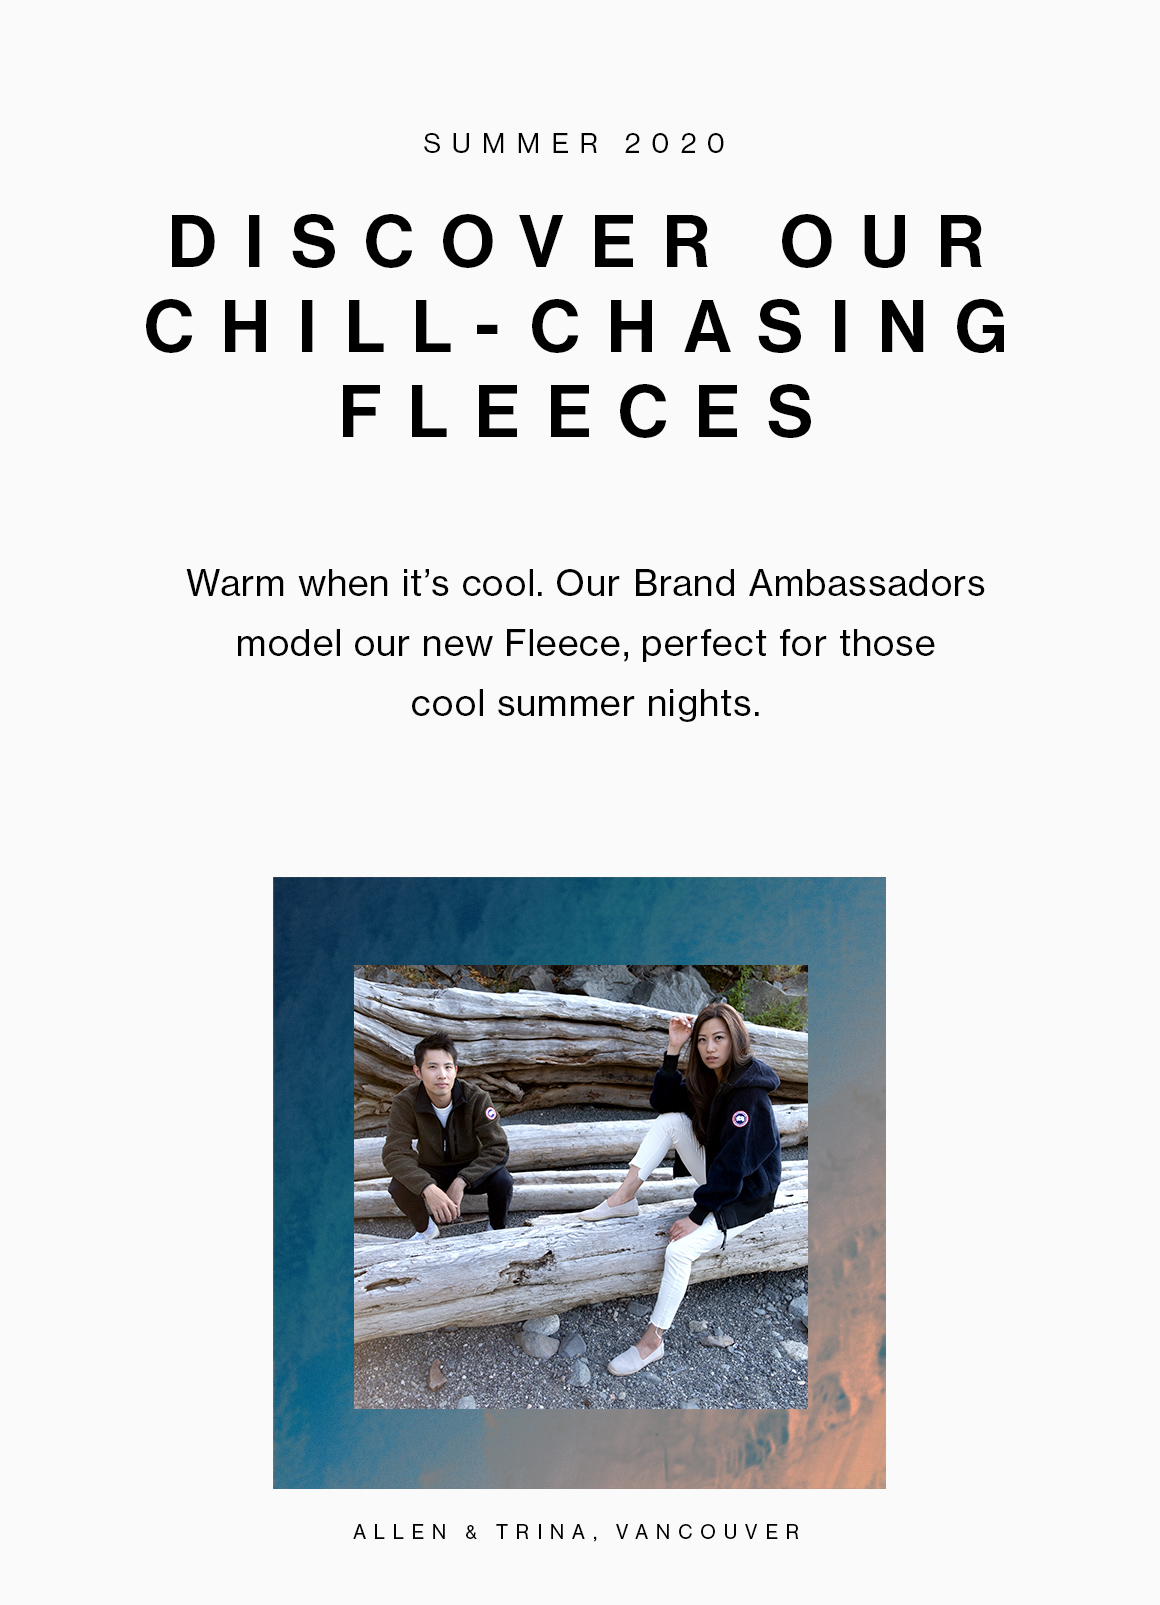 The natural warmth of wool, in the comfort of high-pile fleece. Our Brand Ambassadors reach for our new Fleece to keep the chill away.